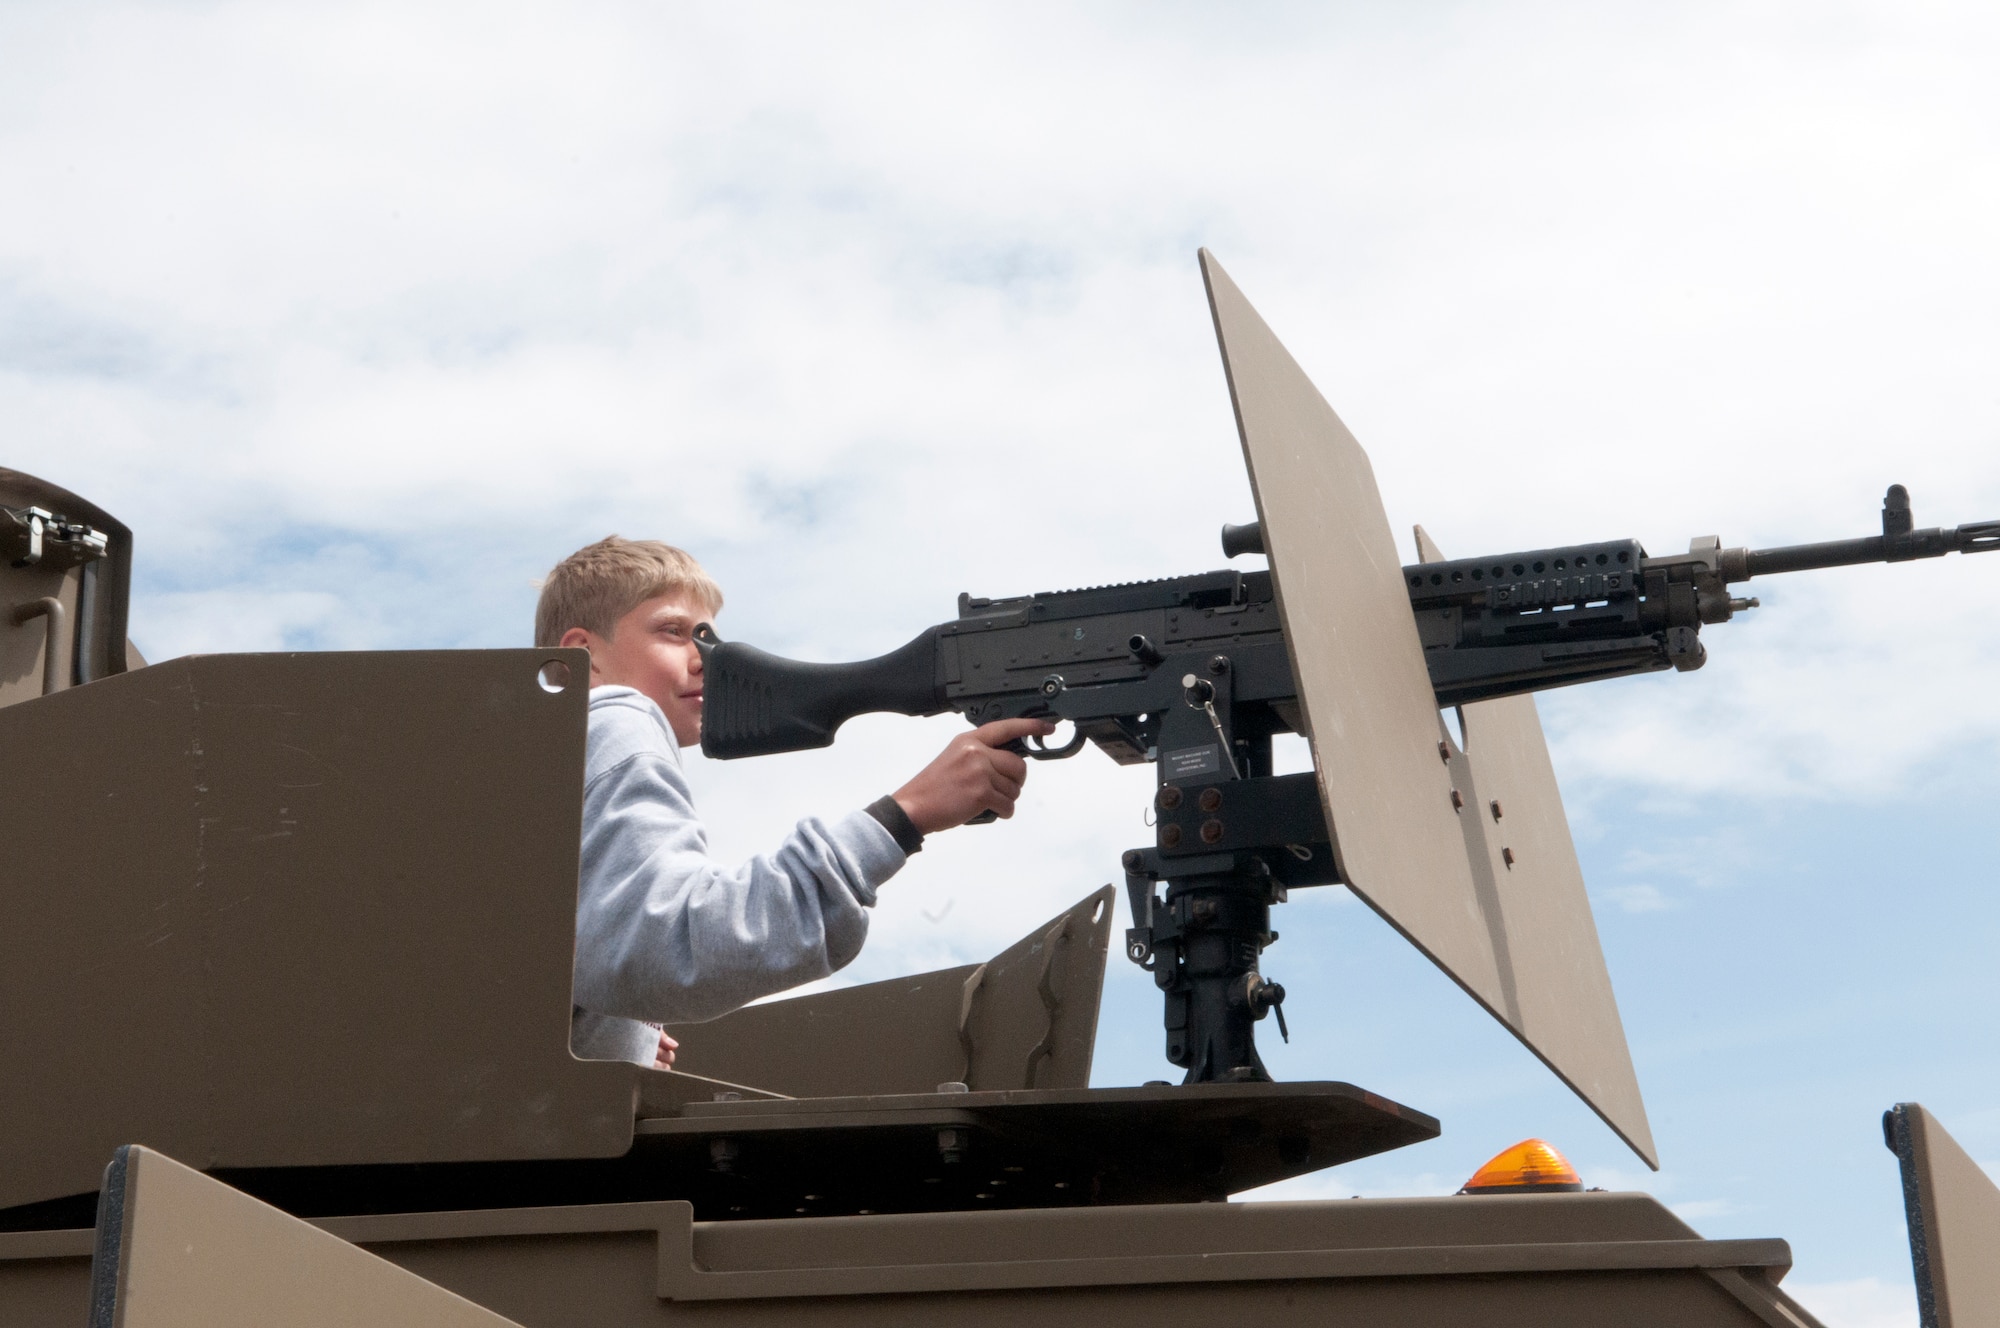 Nathaniel House, a Cheyenne, Wyo., resident, sits in the turret of a Humvee during the Armed Forces Day celebration at the Frontier Mall in Cheyenne, Wyo., May 19. (U.S. Air Force photo by Airman Jason Wiese)